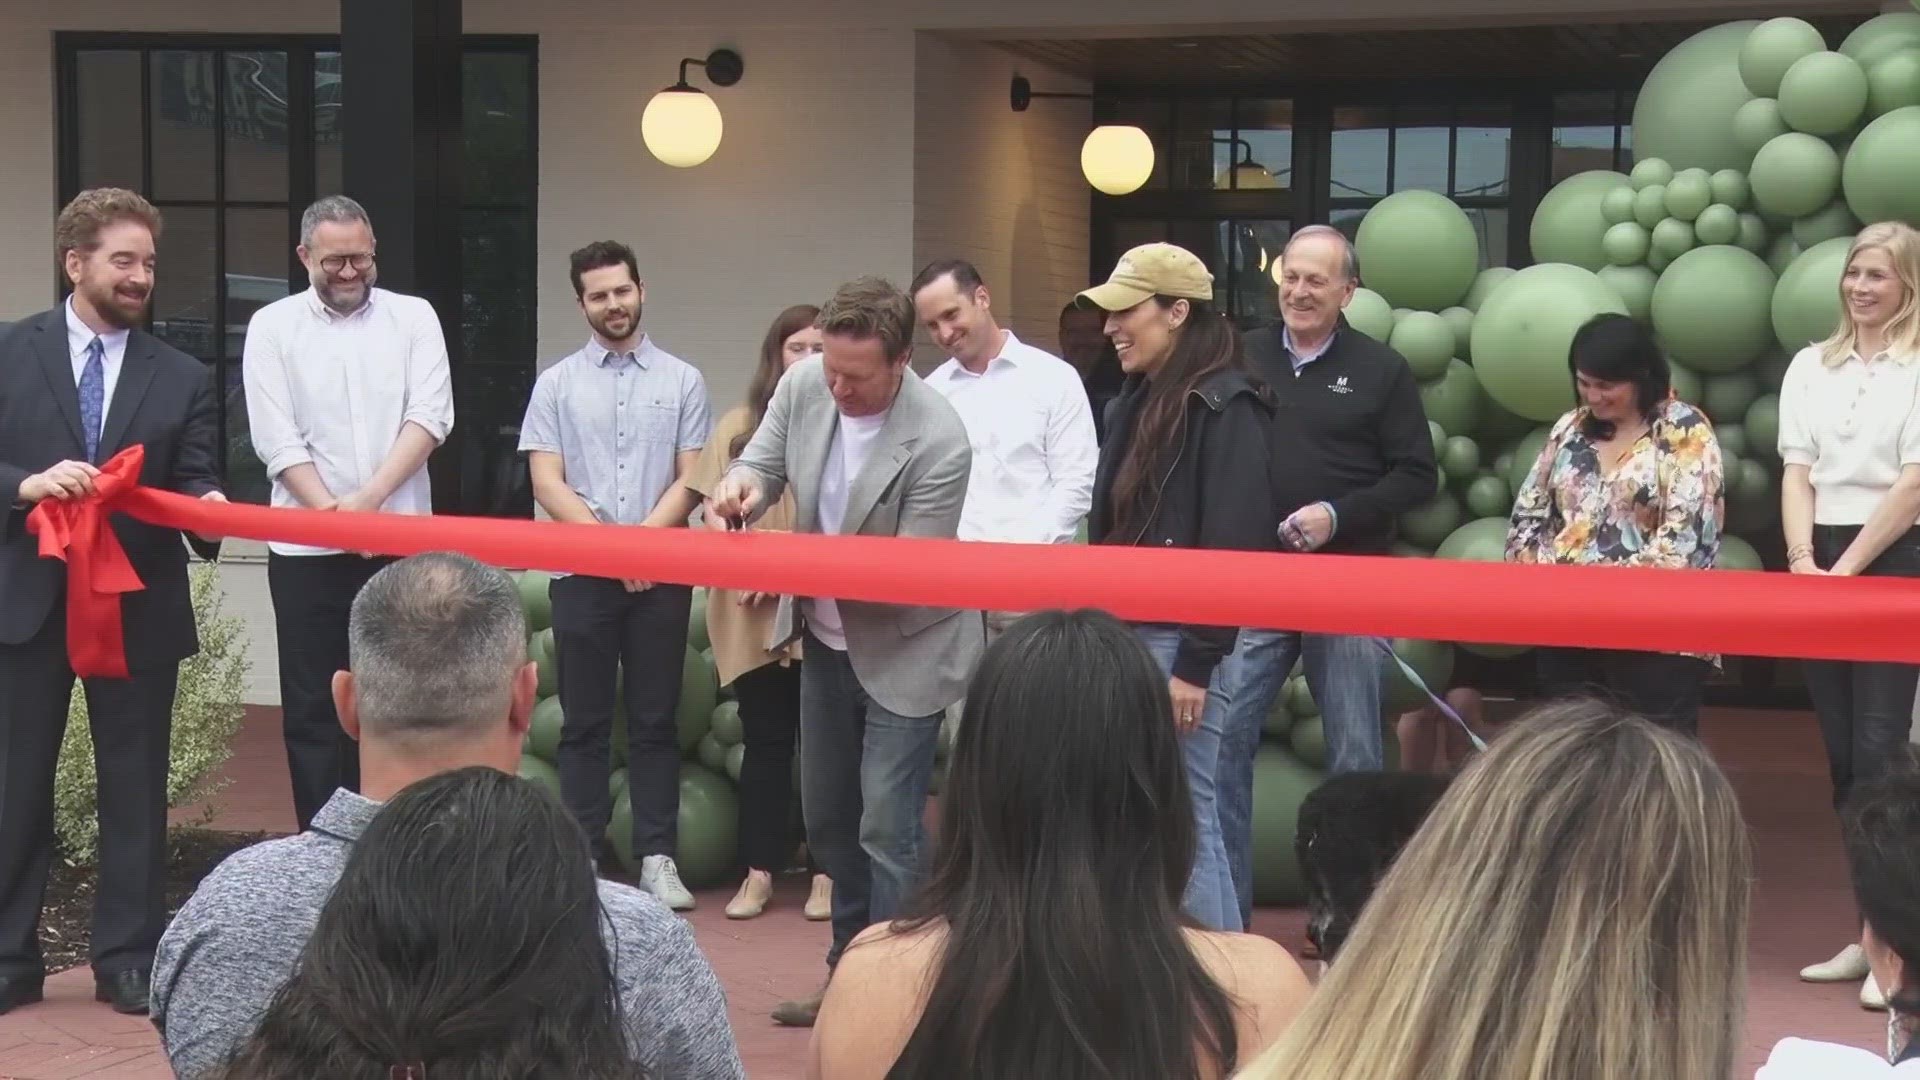 Chip and Joanna Gaines cut the ribbon at what will be the new headquarters for Magnolia.